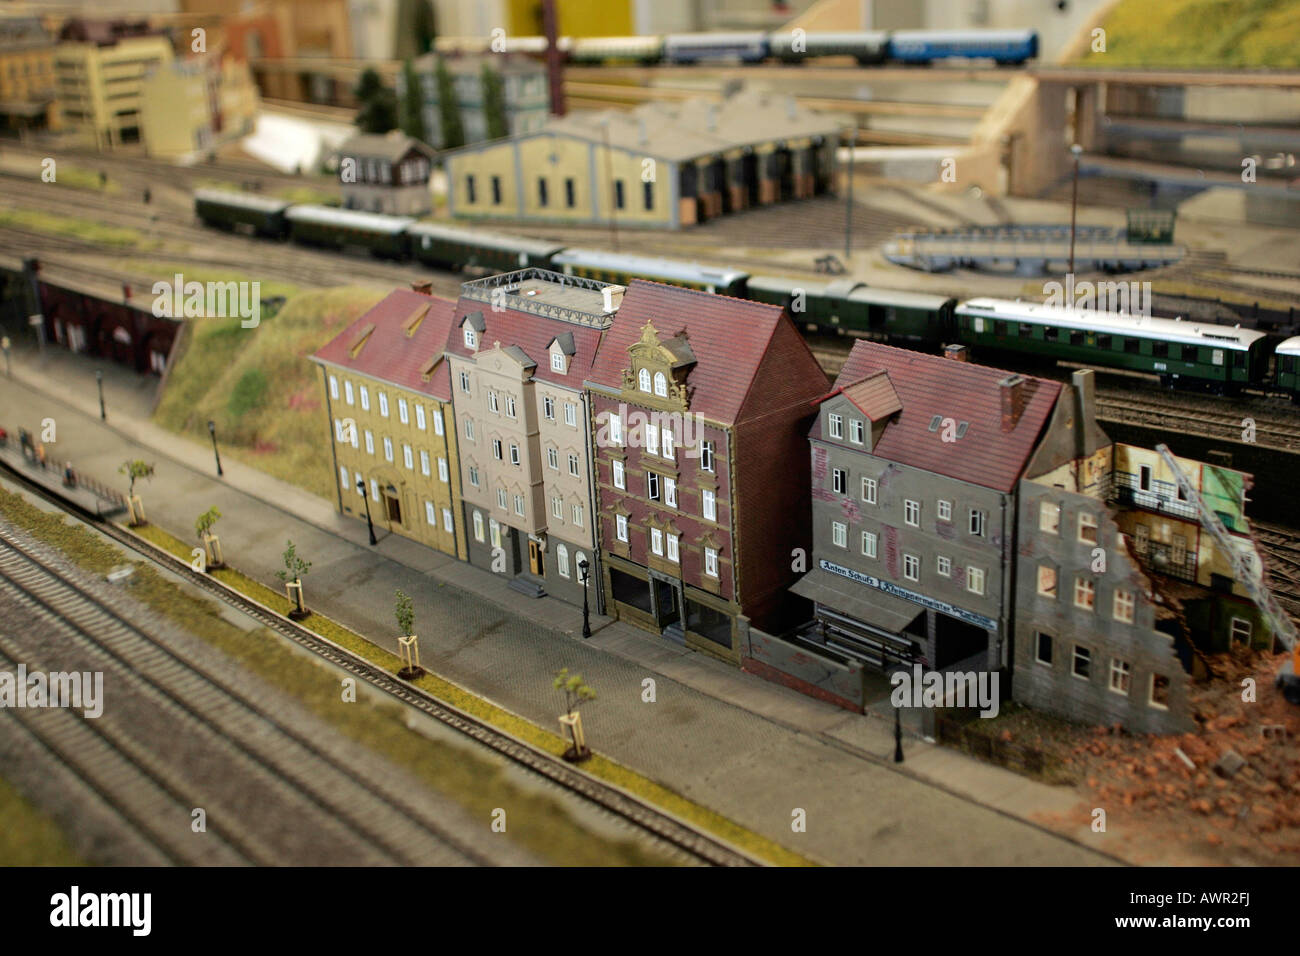 Model railway plant with courses and buildings. Dresden, Saxony, Germany Stock Photo